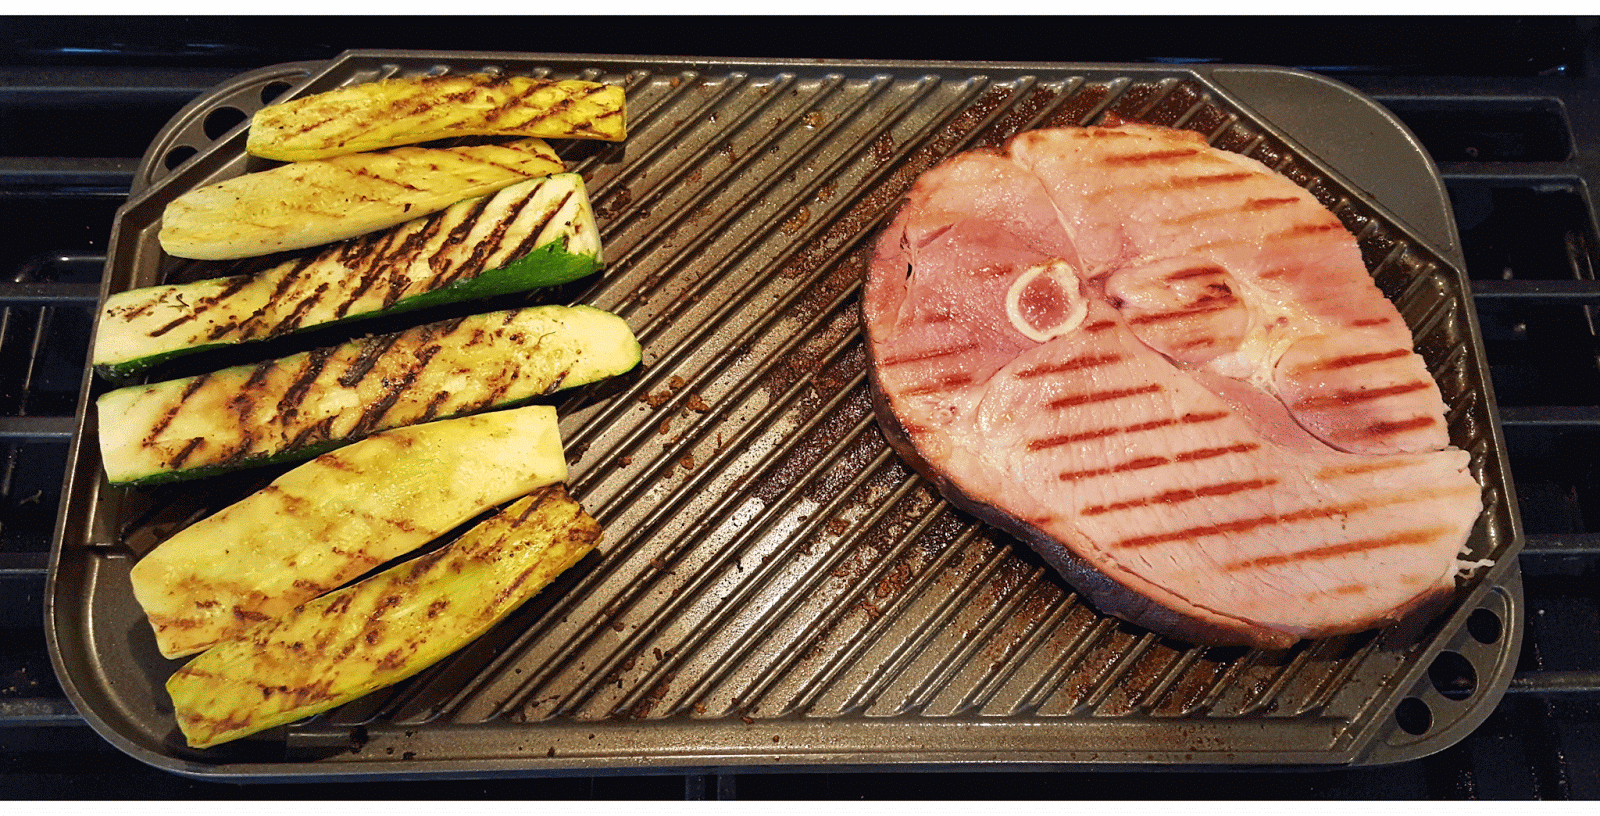 Earl Cooks Grilled Ham Steak and Two Squashes while Dog Sitting.